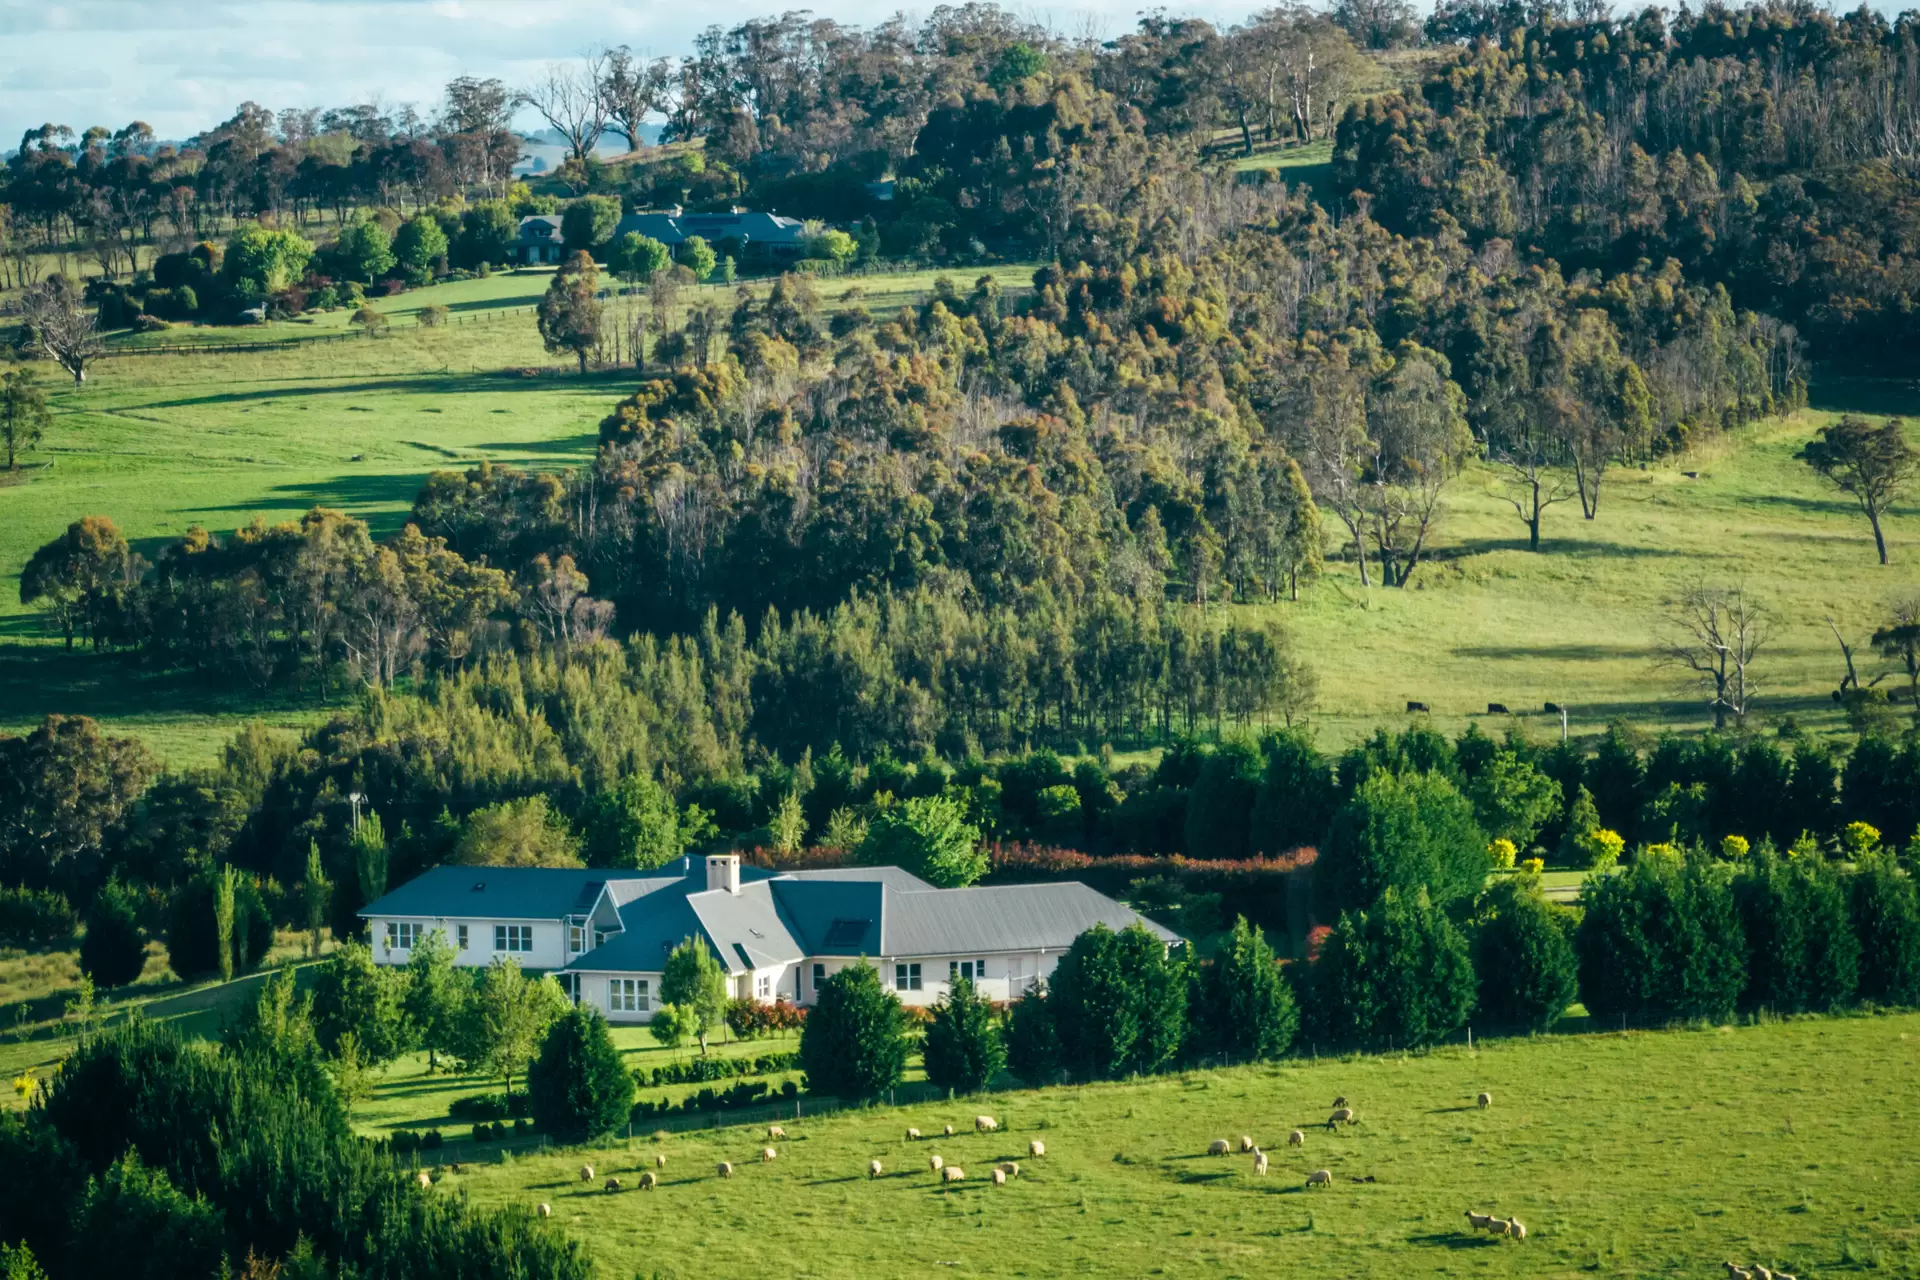 Photo #1: 550 Oxleys Hill Road, Berrima - Sold by Drew Lindsay Sotheby's International Realty